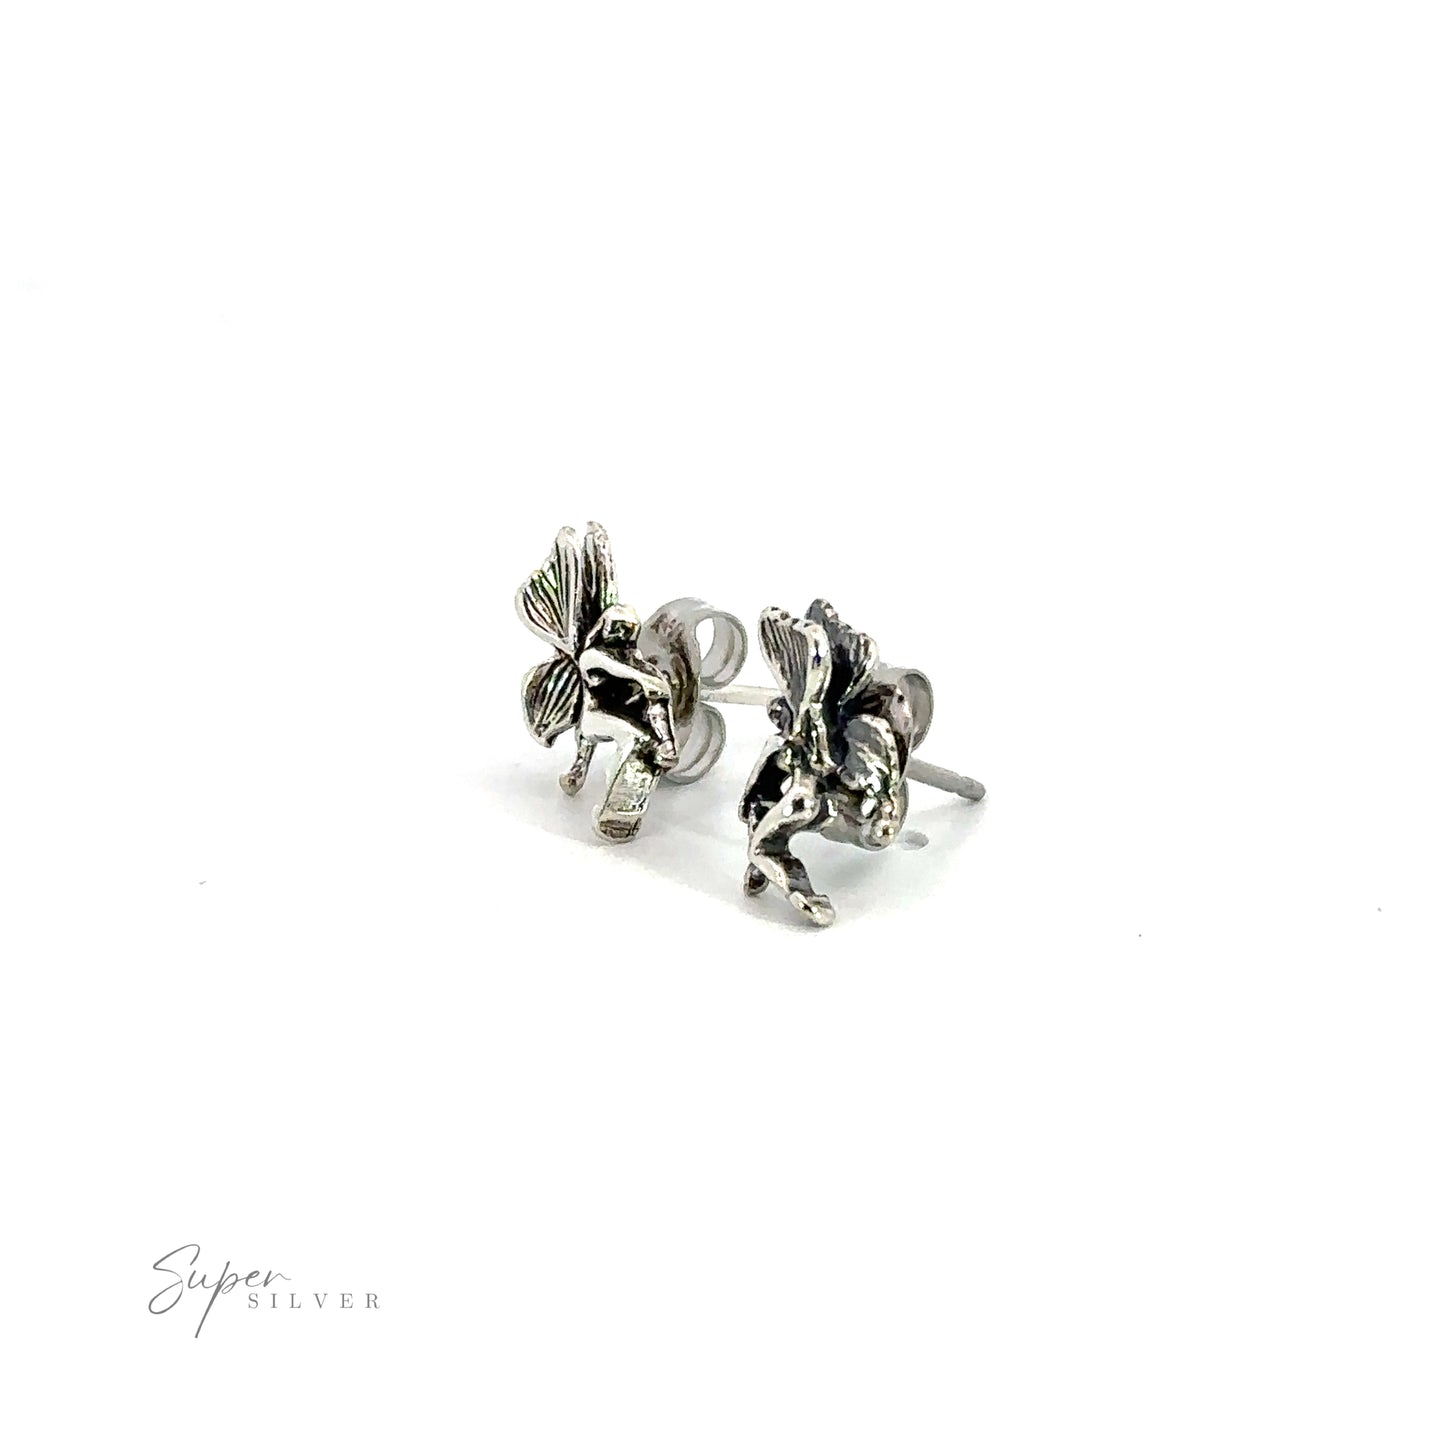 A pair of enchanting Fairy Studs on a white background.